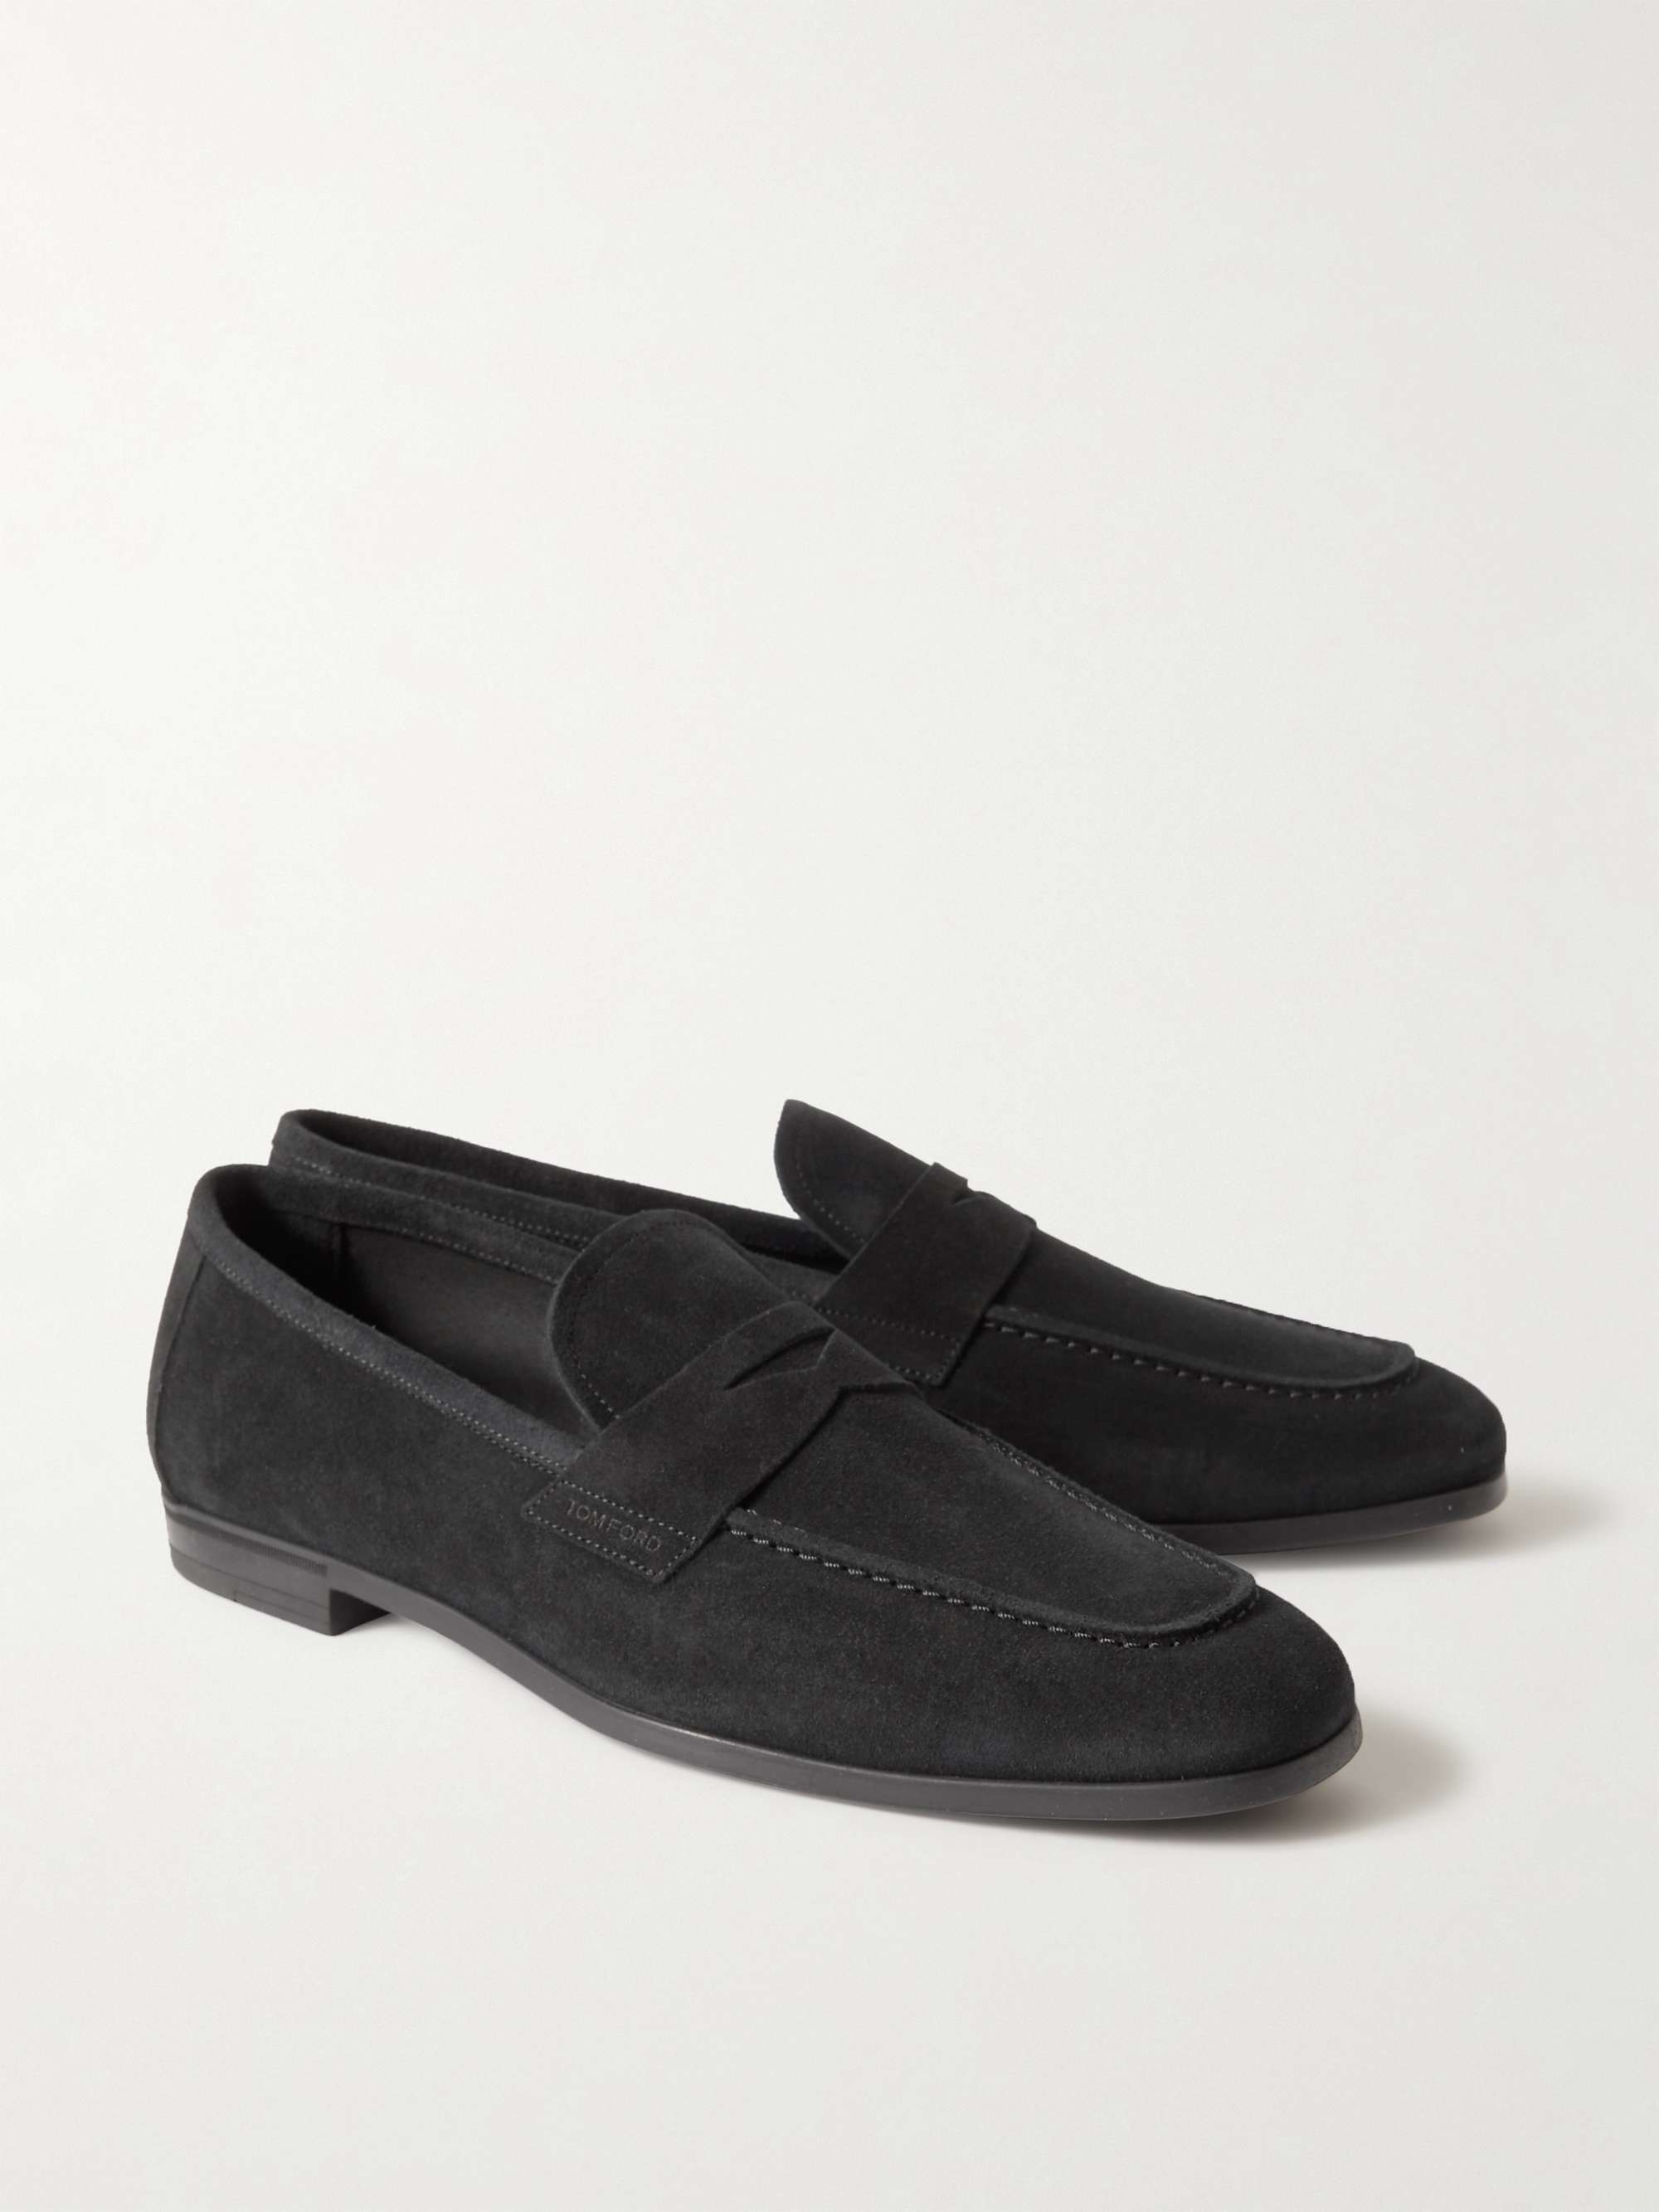 TOM FORD Sean Leather Penny Loafers